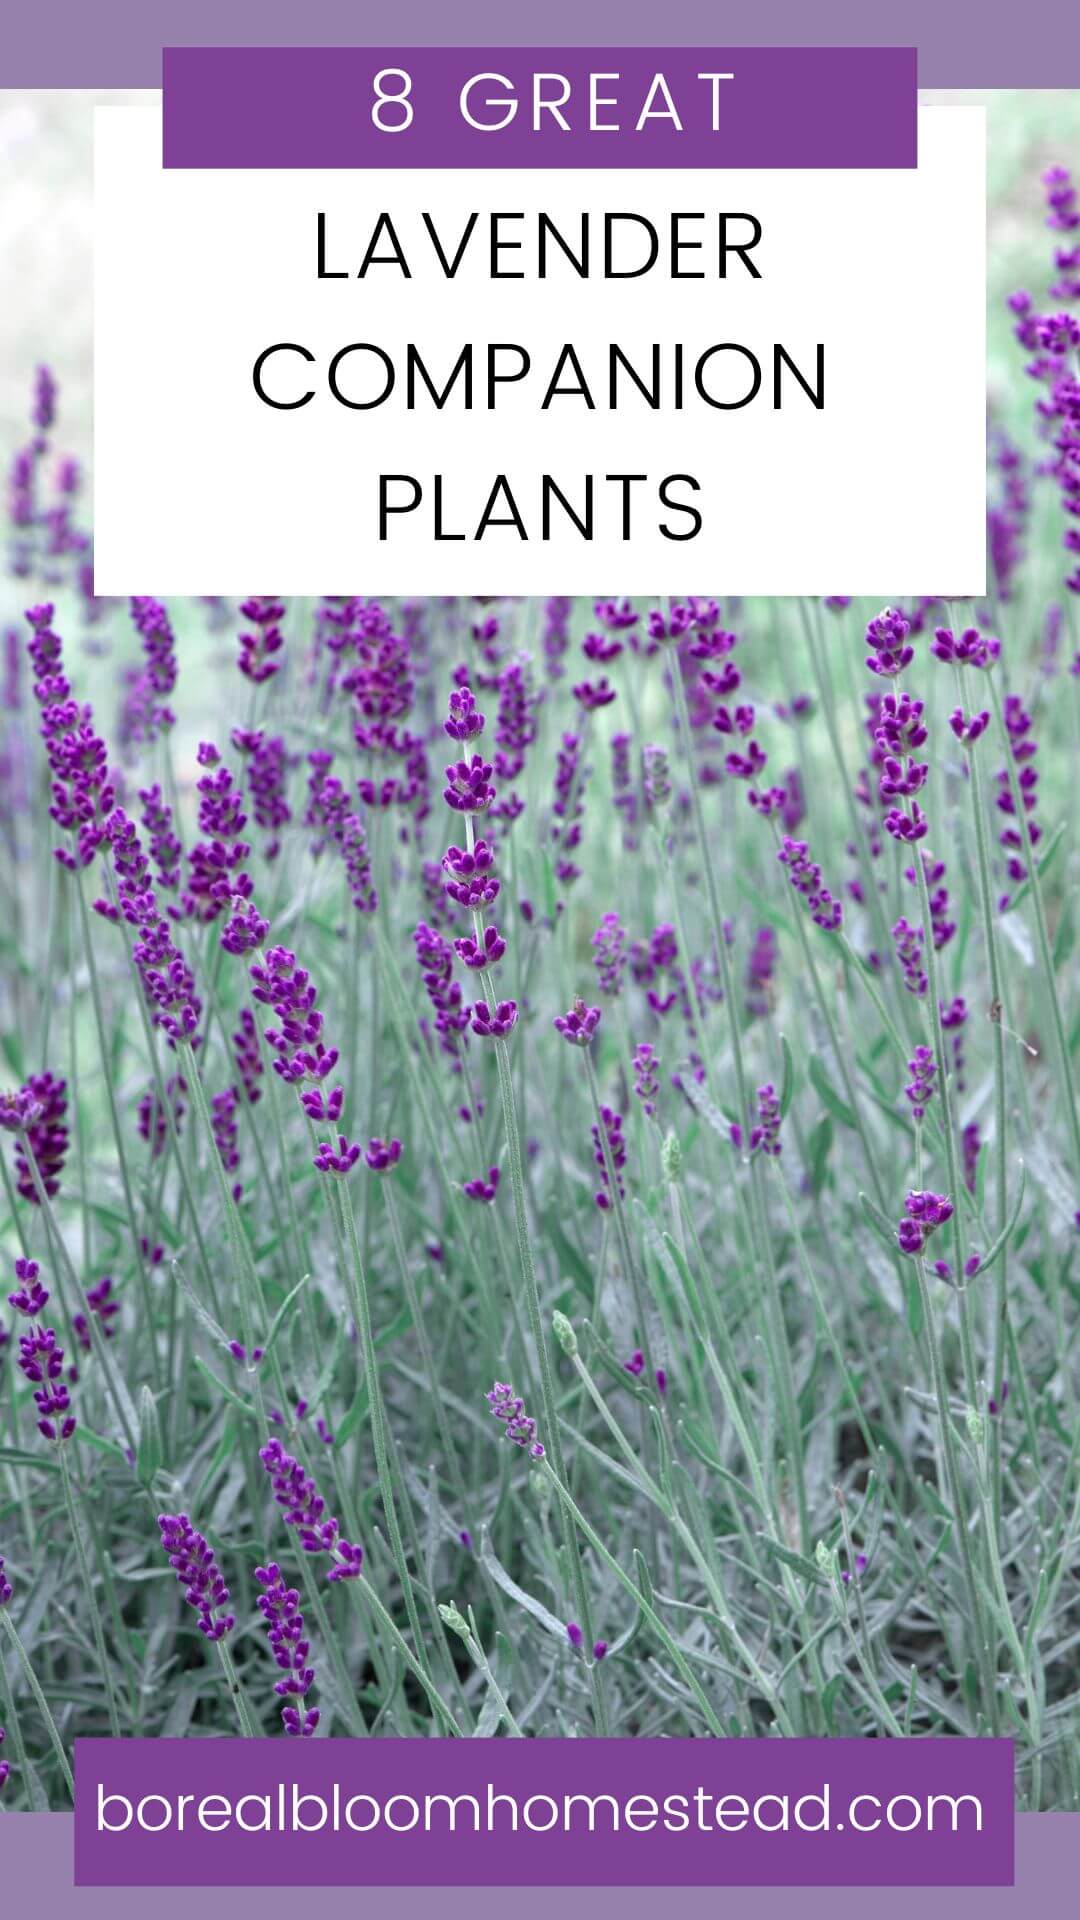 Flowering lavender plants with text overlay : 8 great lavender companion plants. 